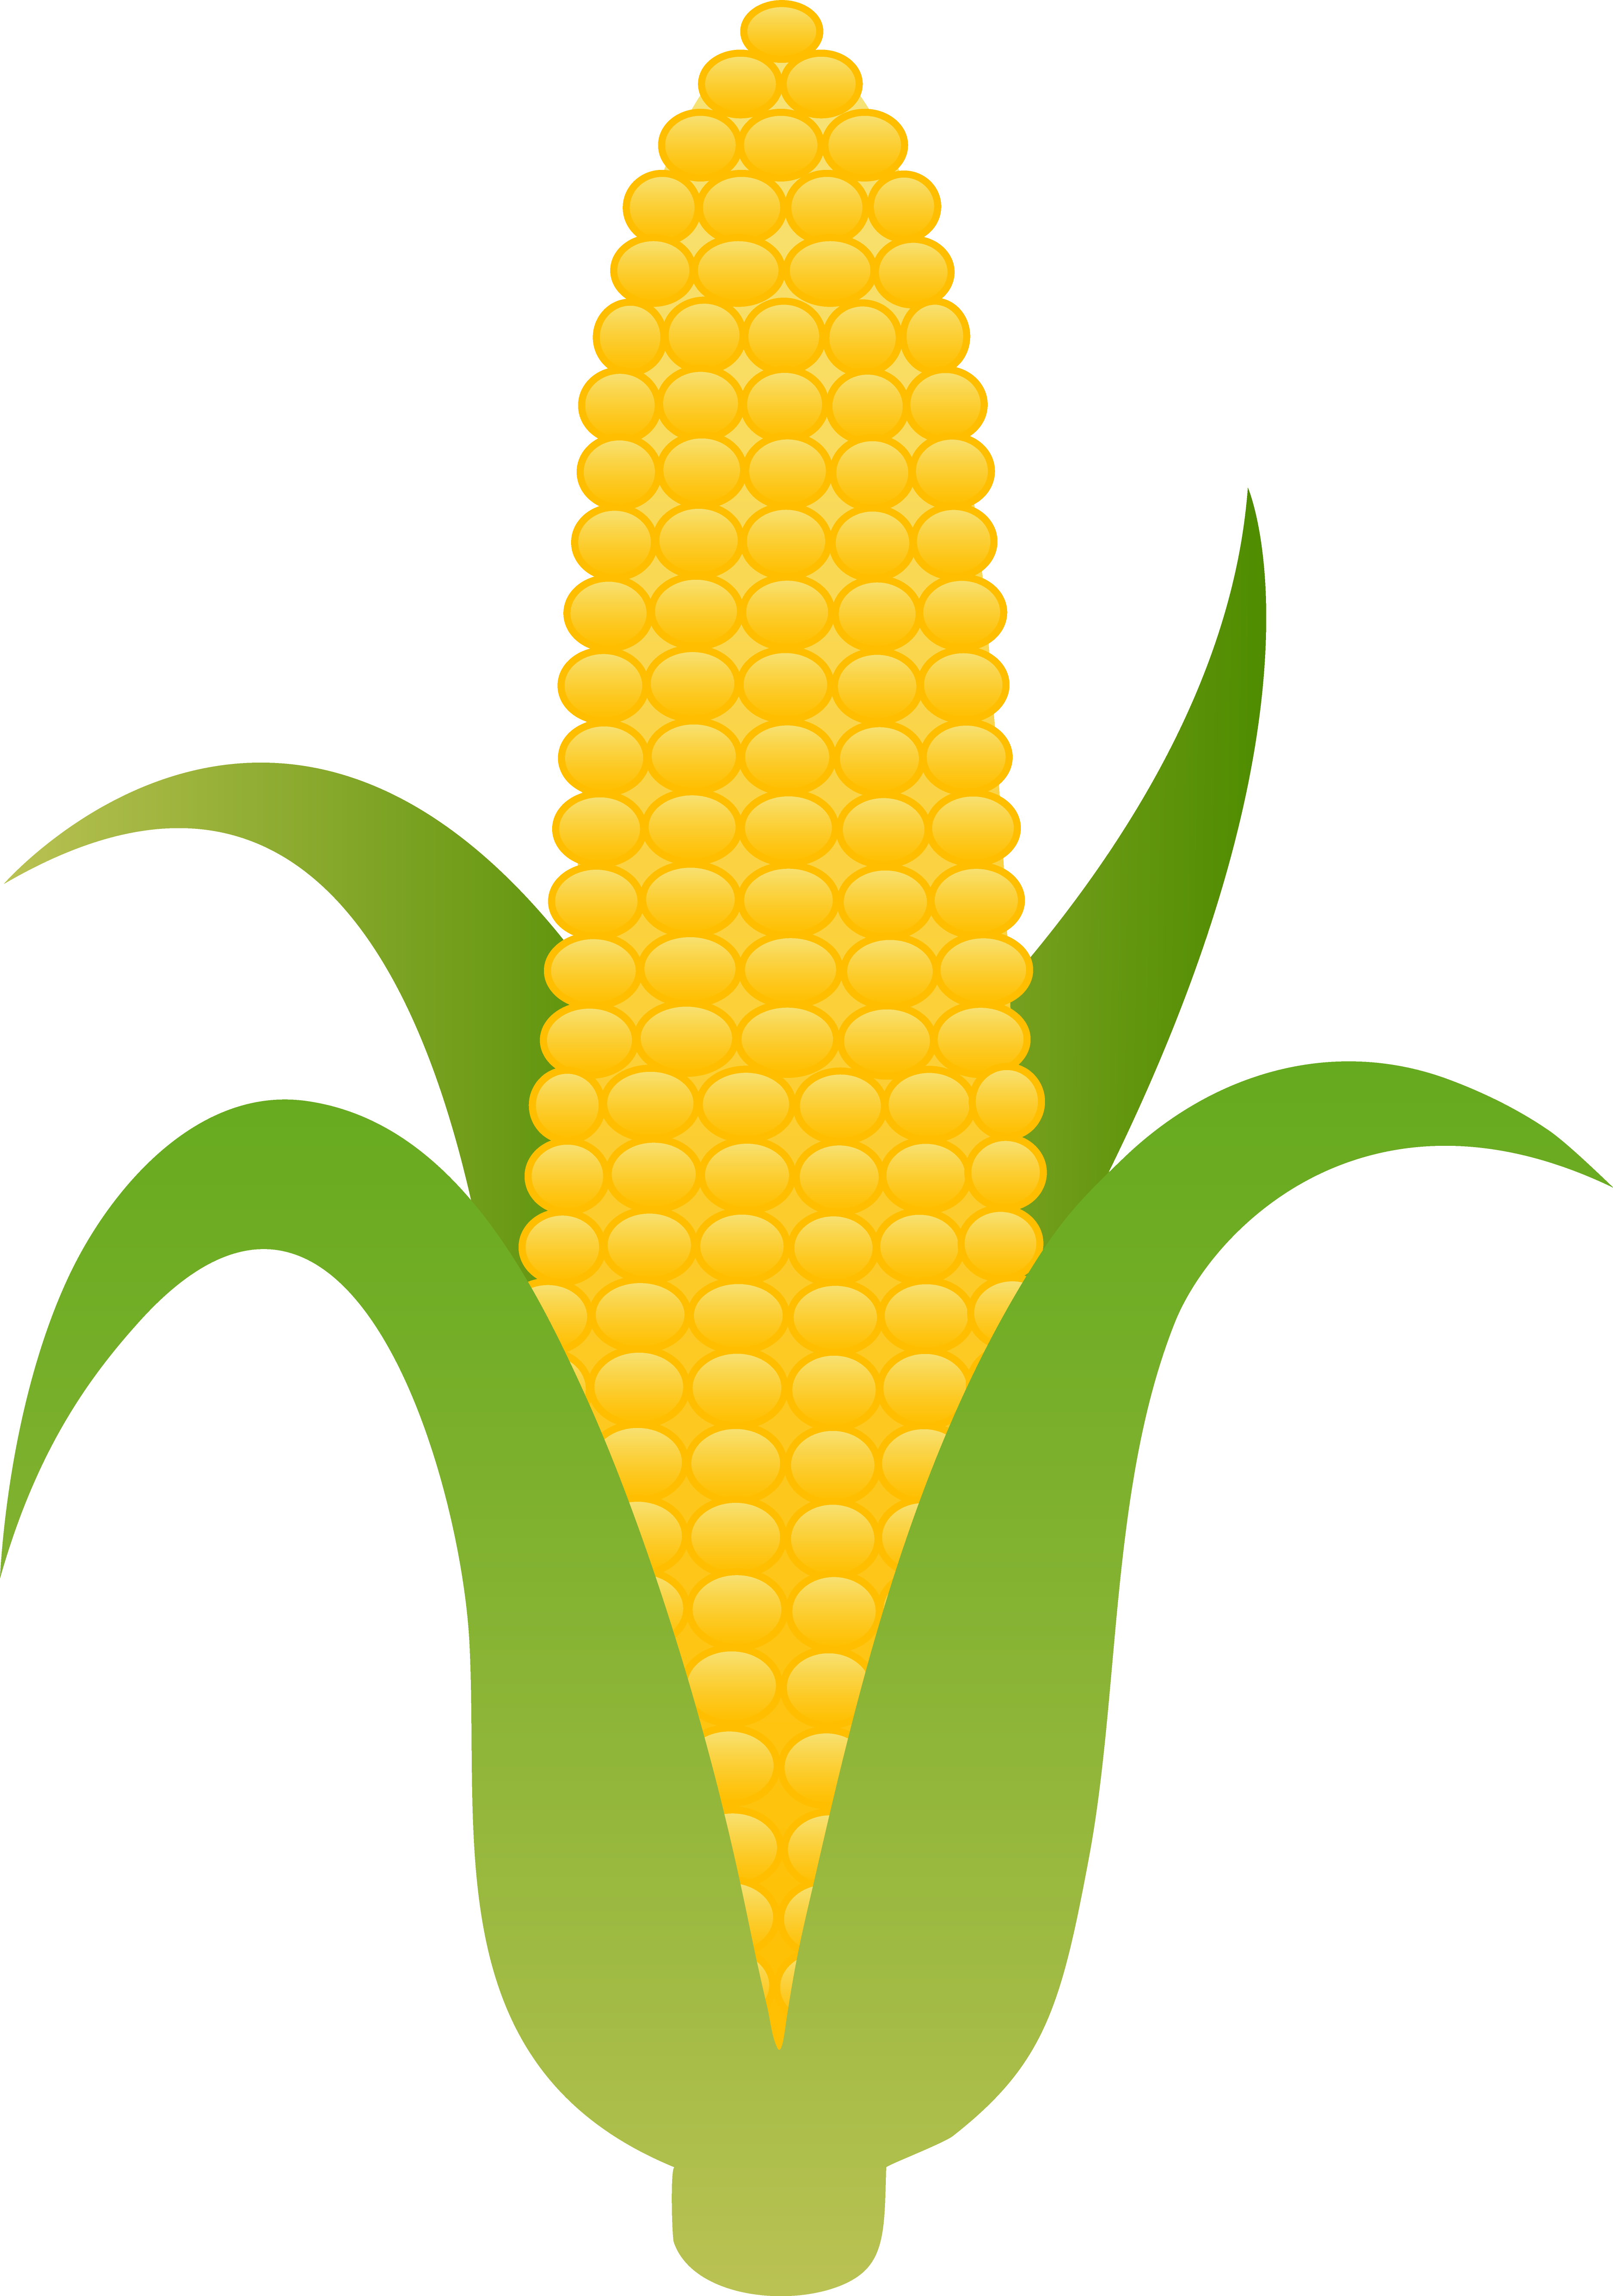 Images For Clip Art Corn On . - Corn On The Cob Clip Art